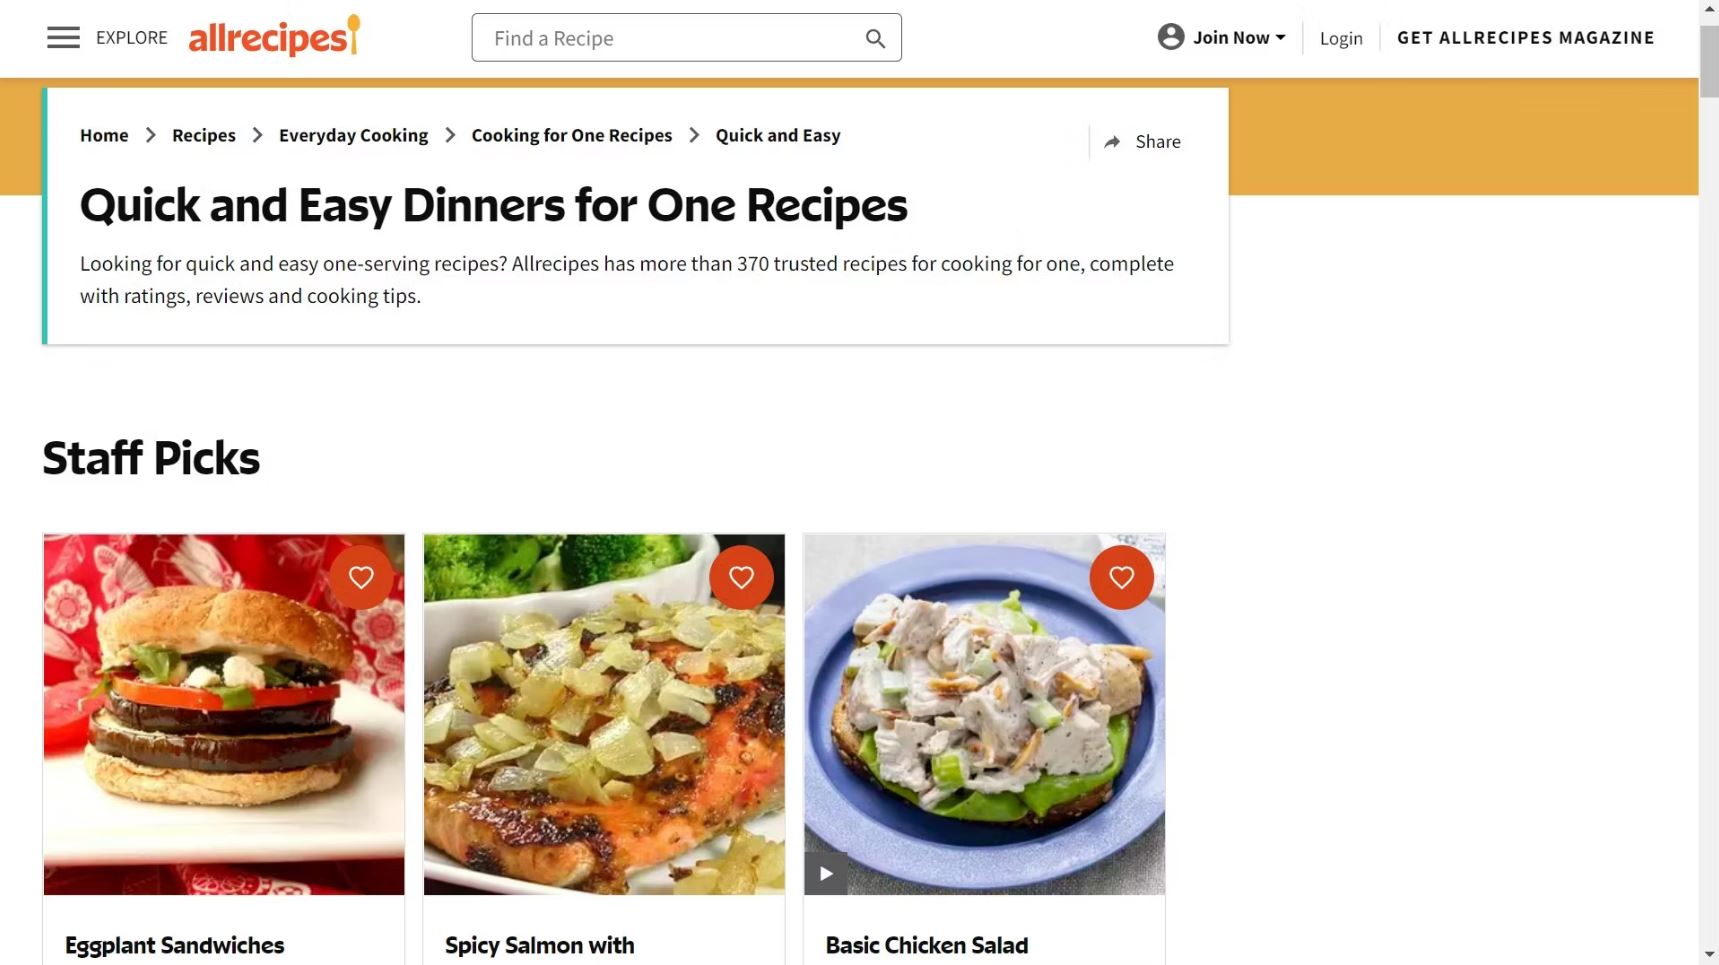 Quick and Easy Dinners for One by Allrecipes